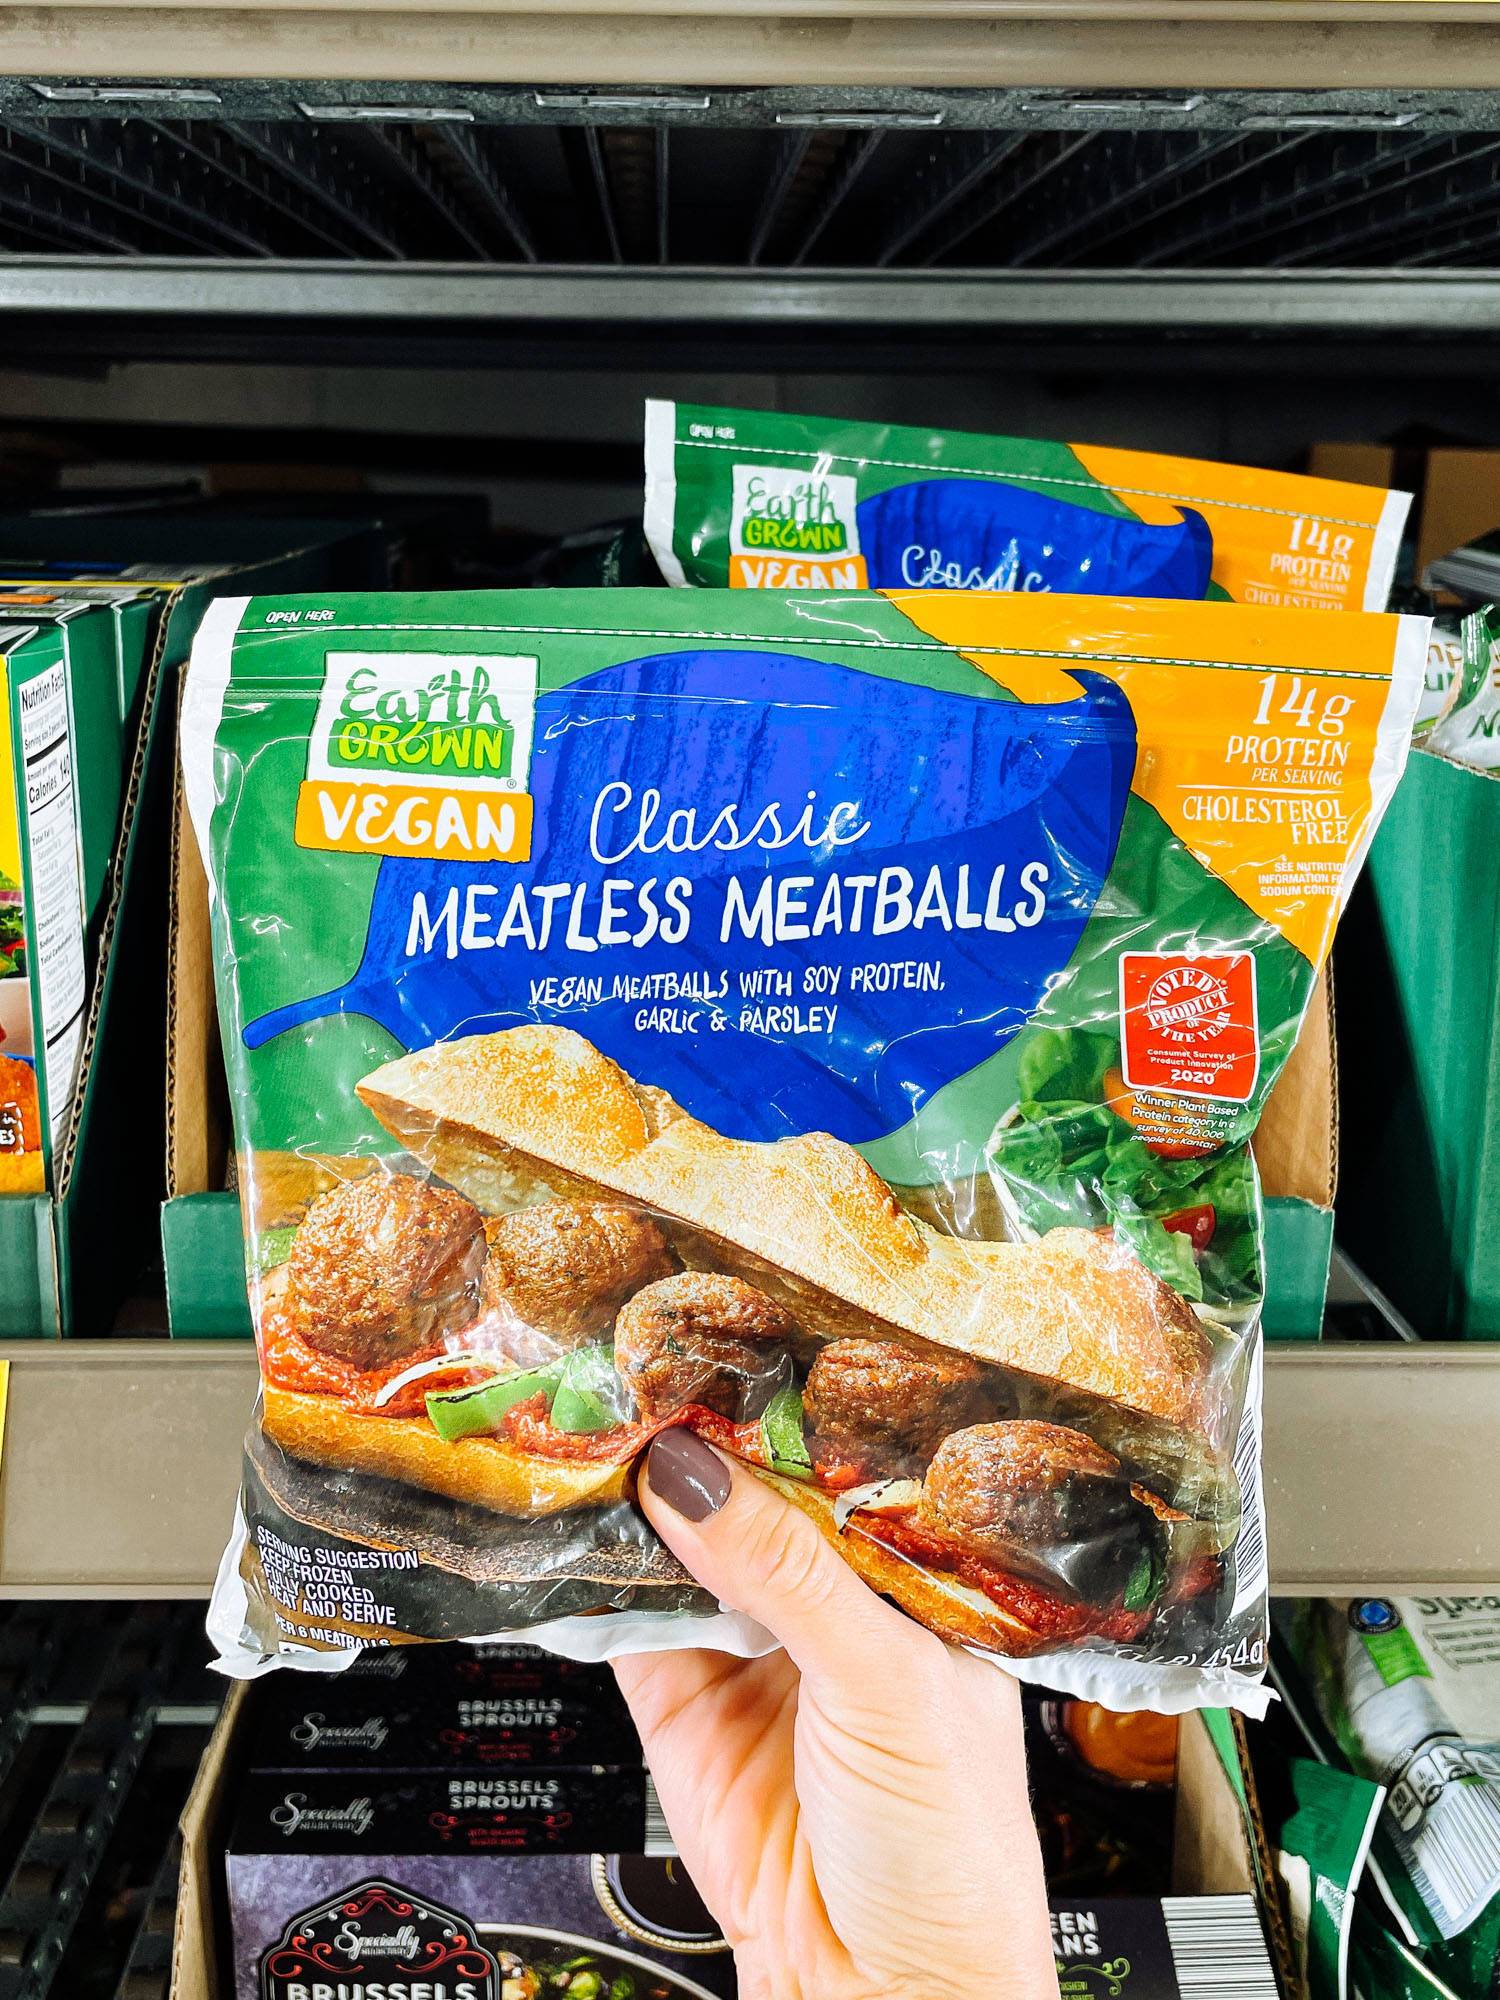 White hand holding meatless meatballs bag from ALDI.